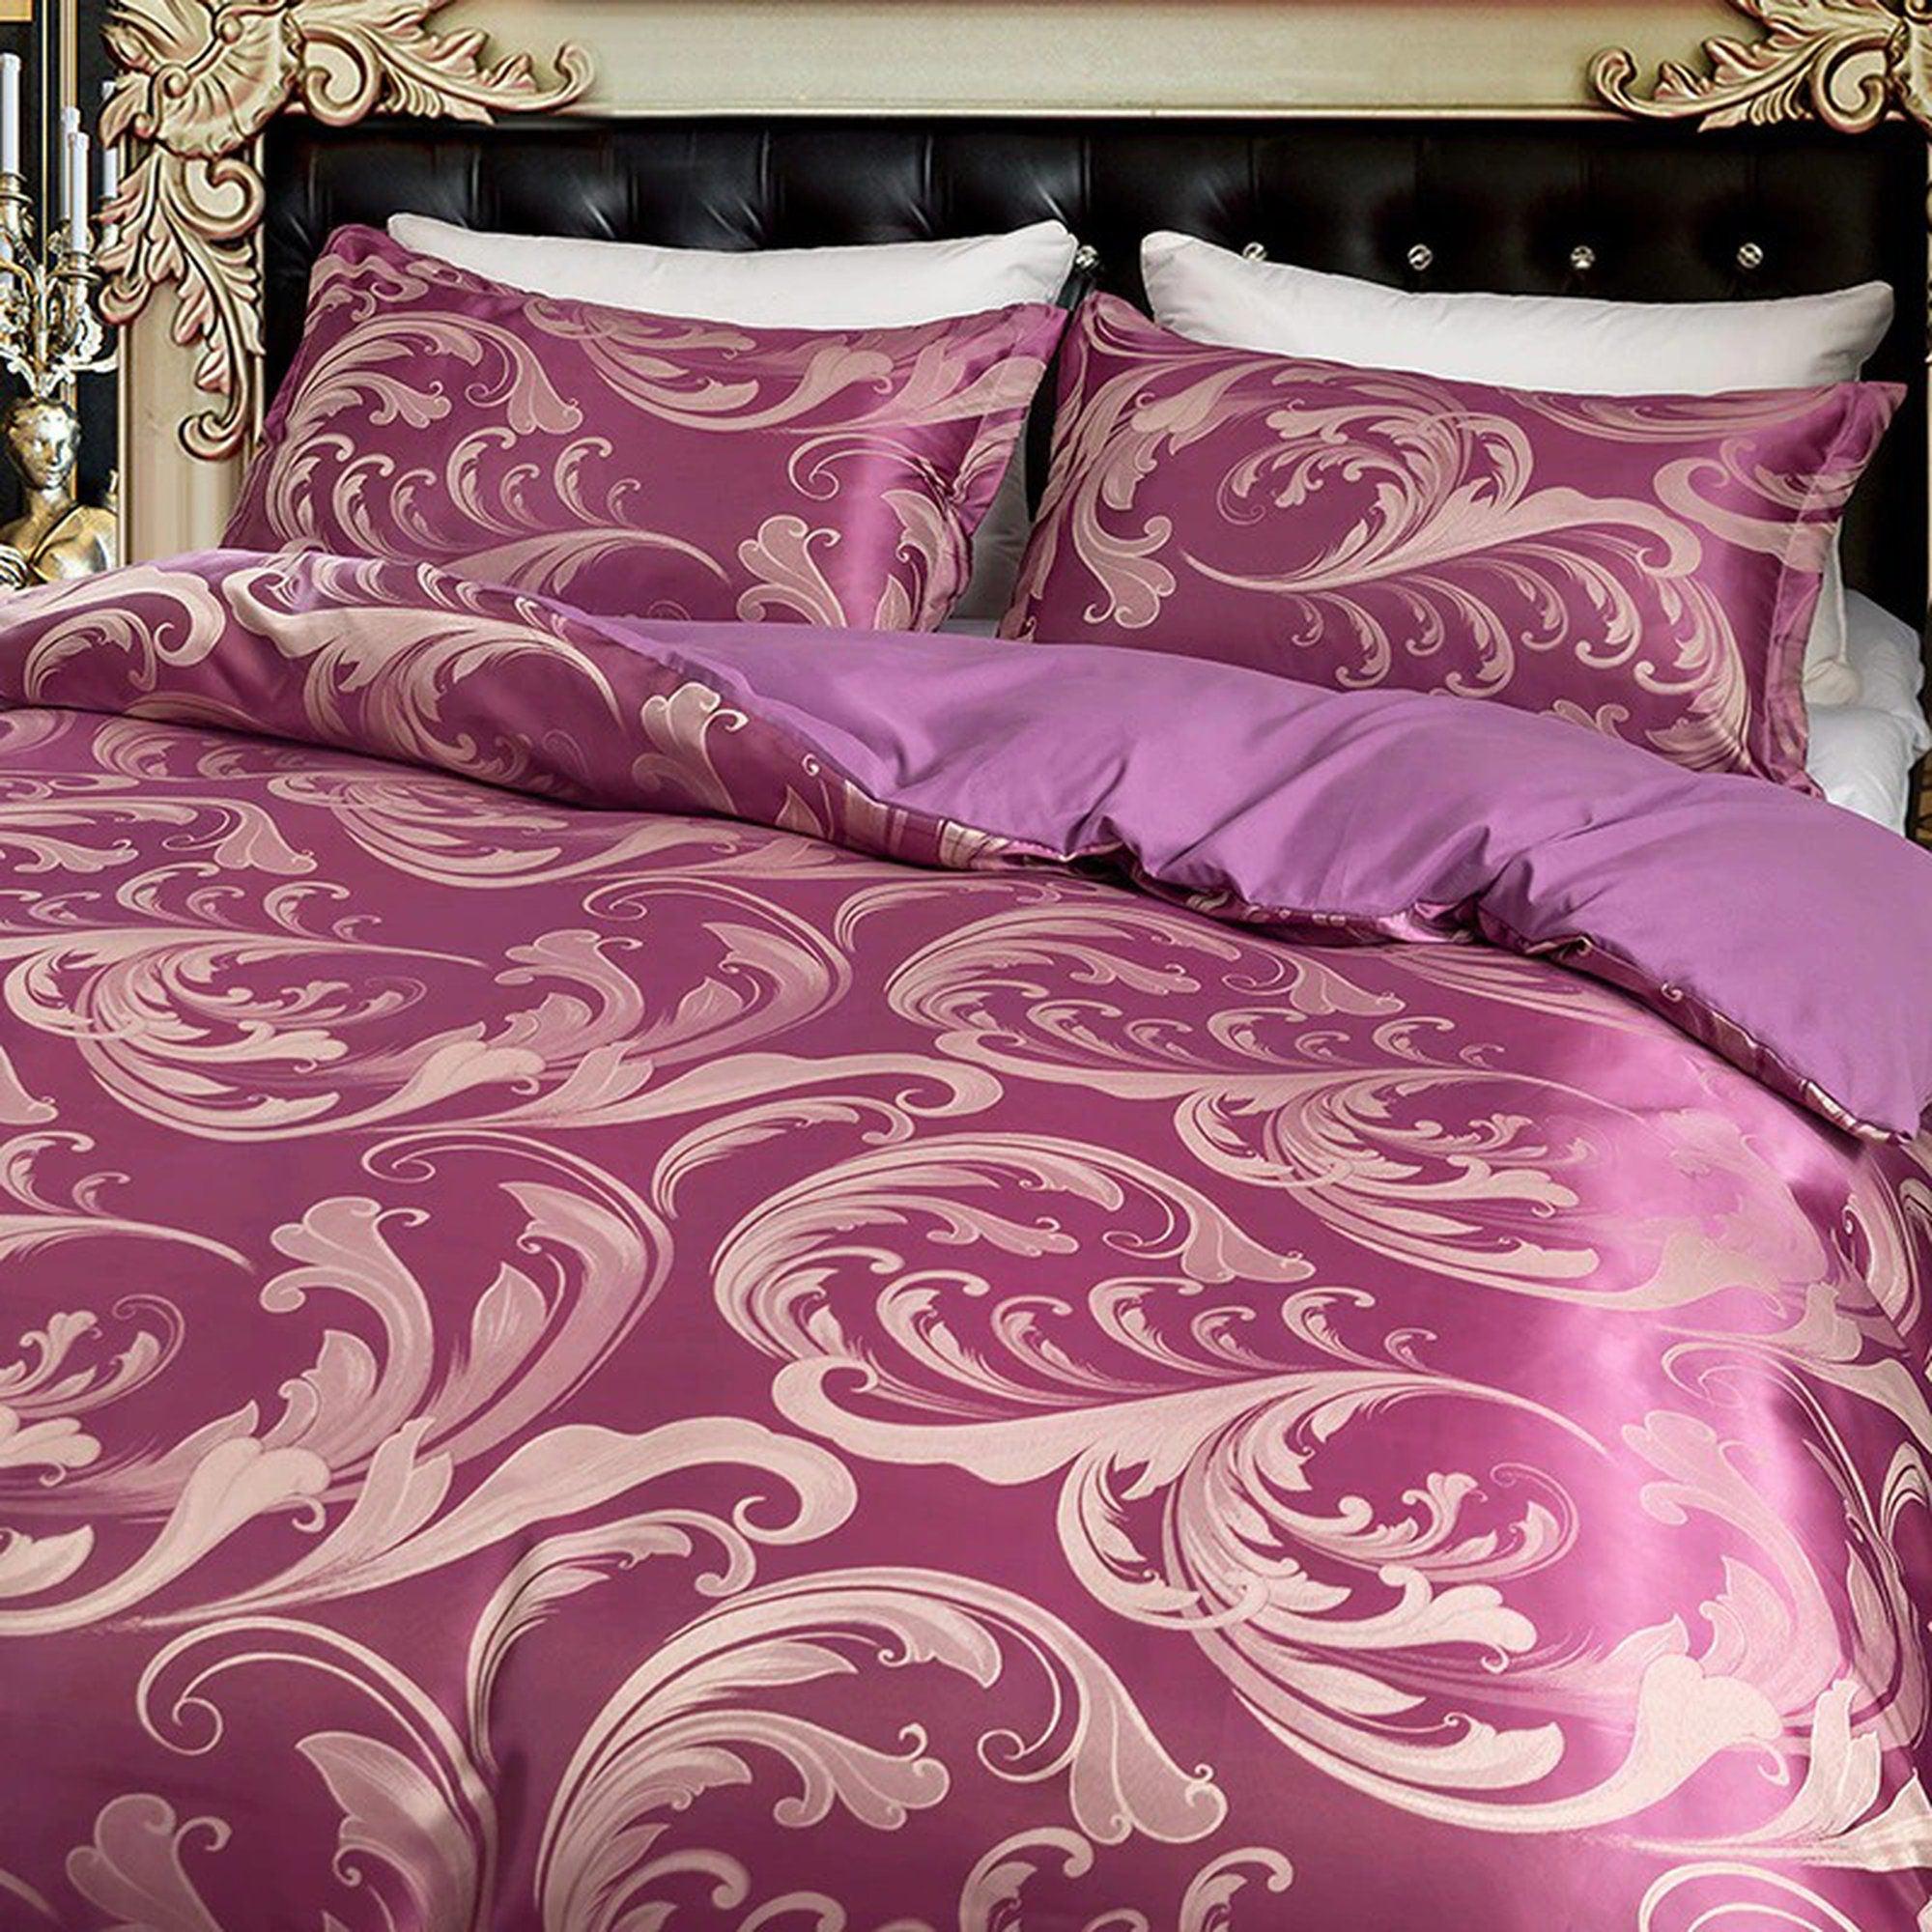 daintyduvet Rouge Pink Luxury Bedding made with Silky Jacquard Fabric, Damask Duvet Cover Set, Designer Bedding, Aesthetic Duvet King Queen Full Twin